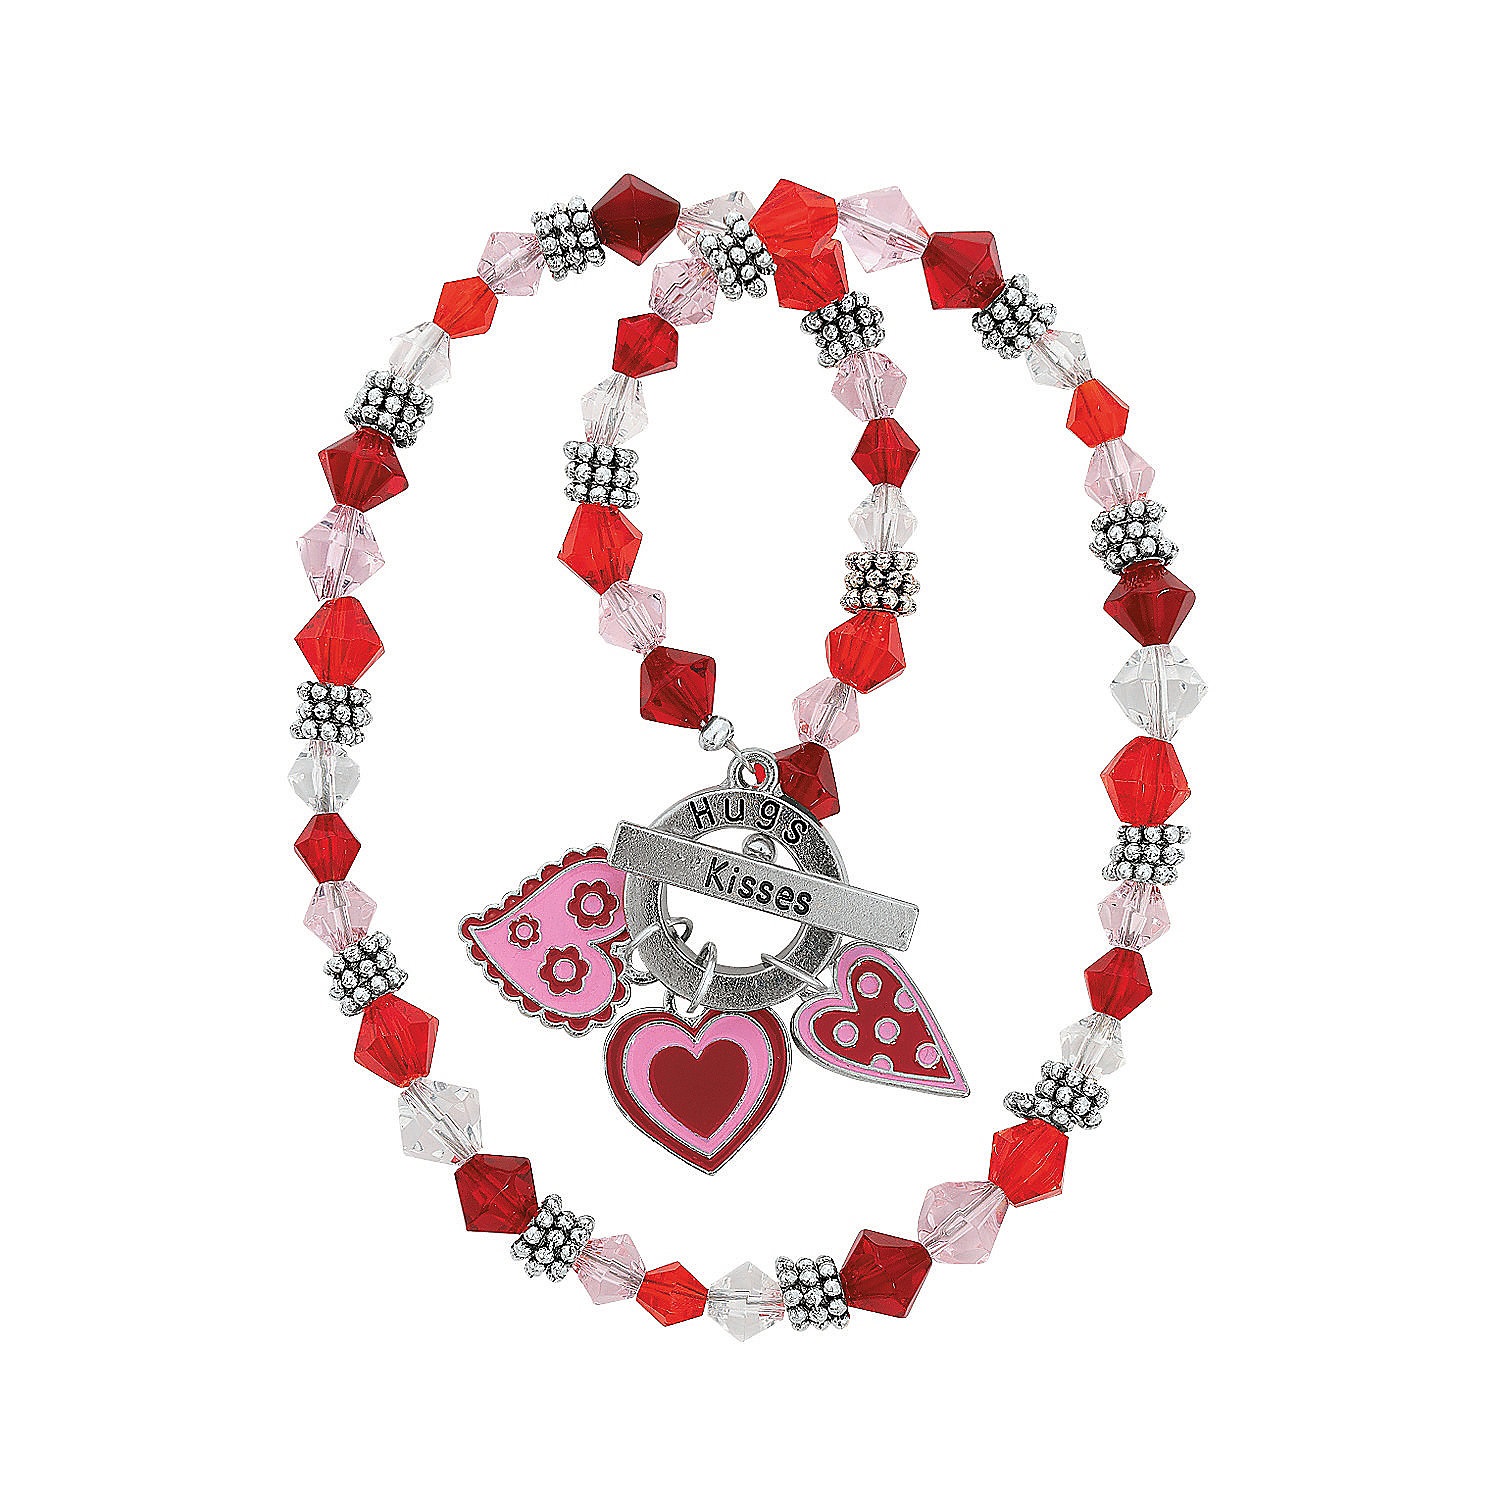 red-and-pink-enamel-heart-charms-24-pc-_68_45690-a01